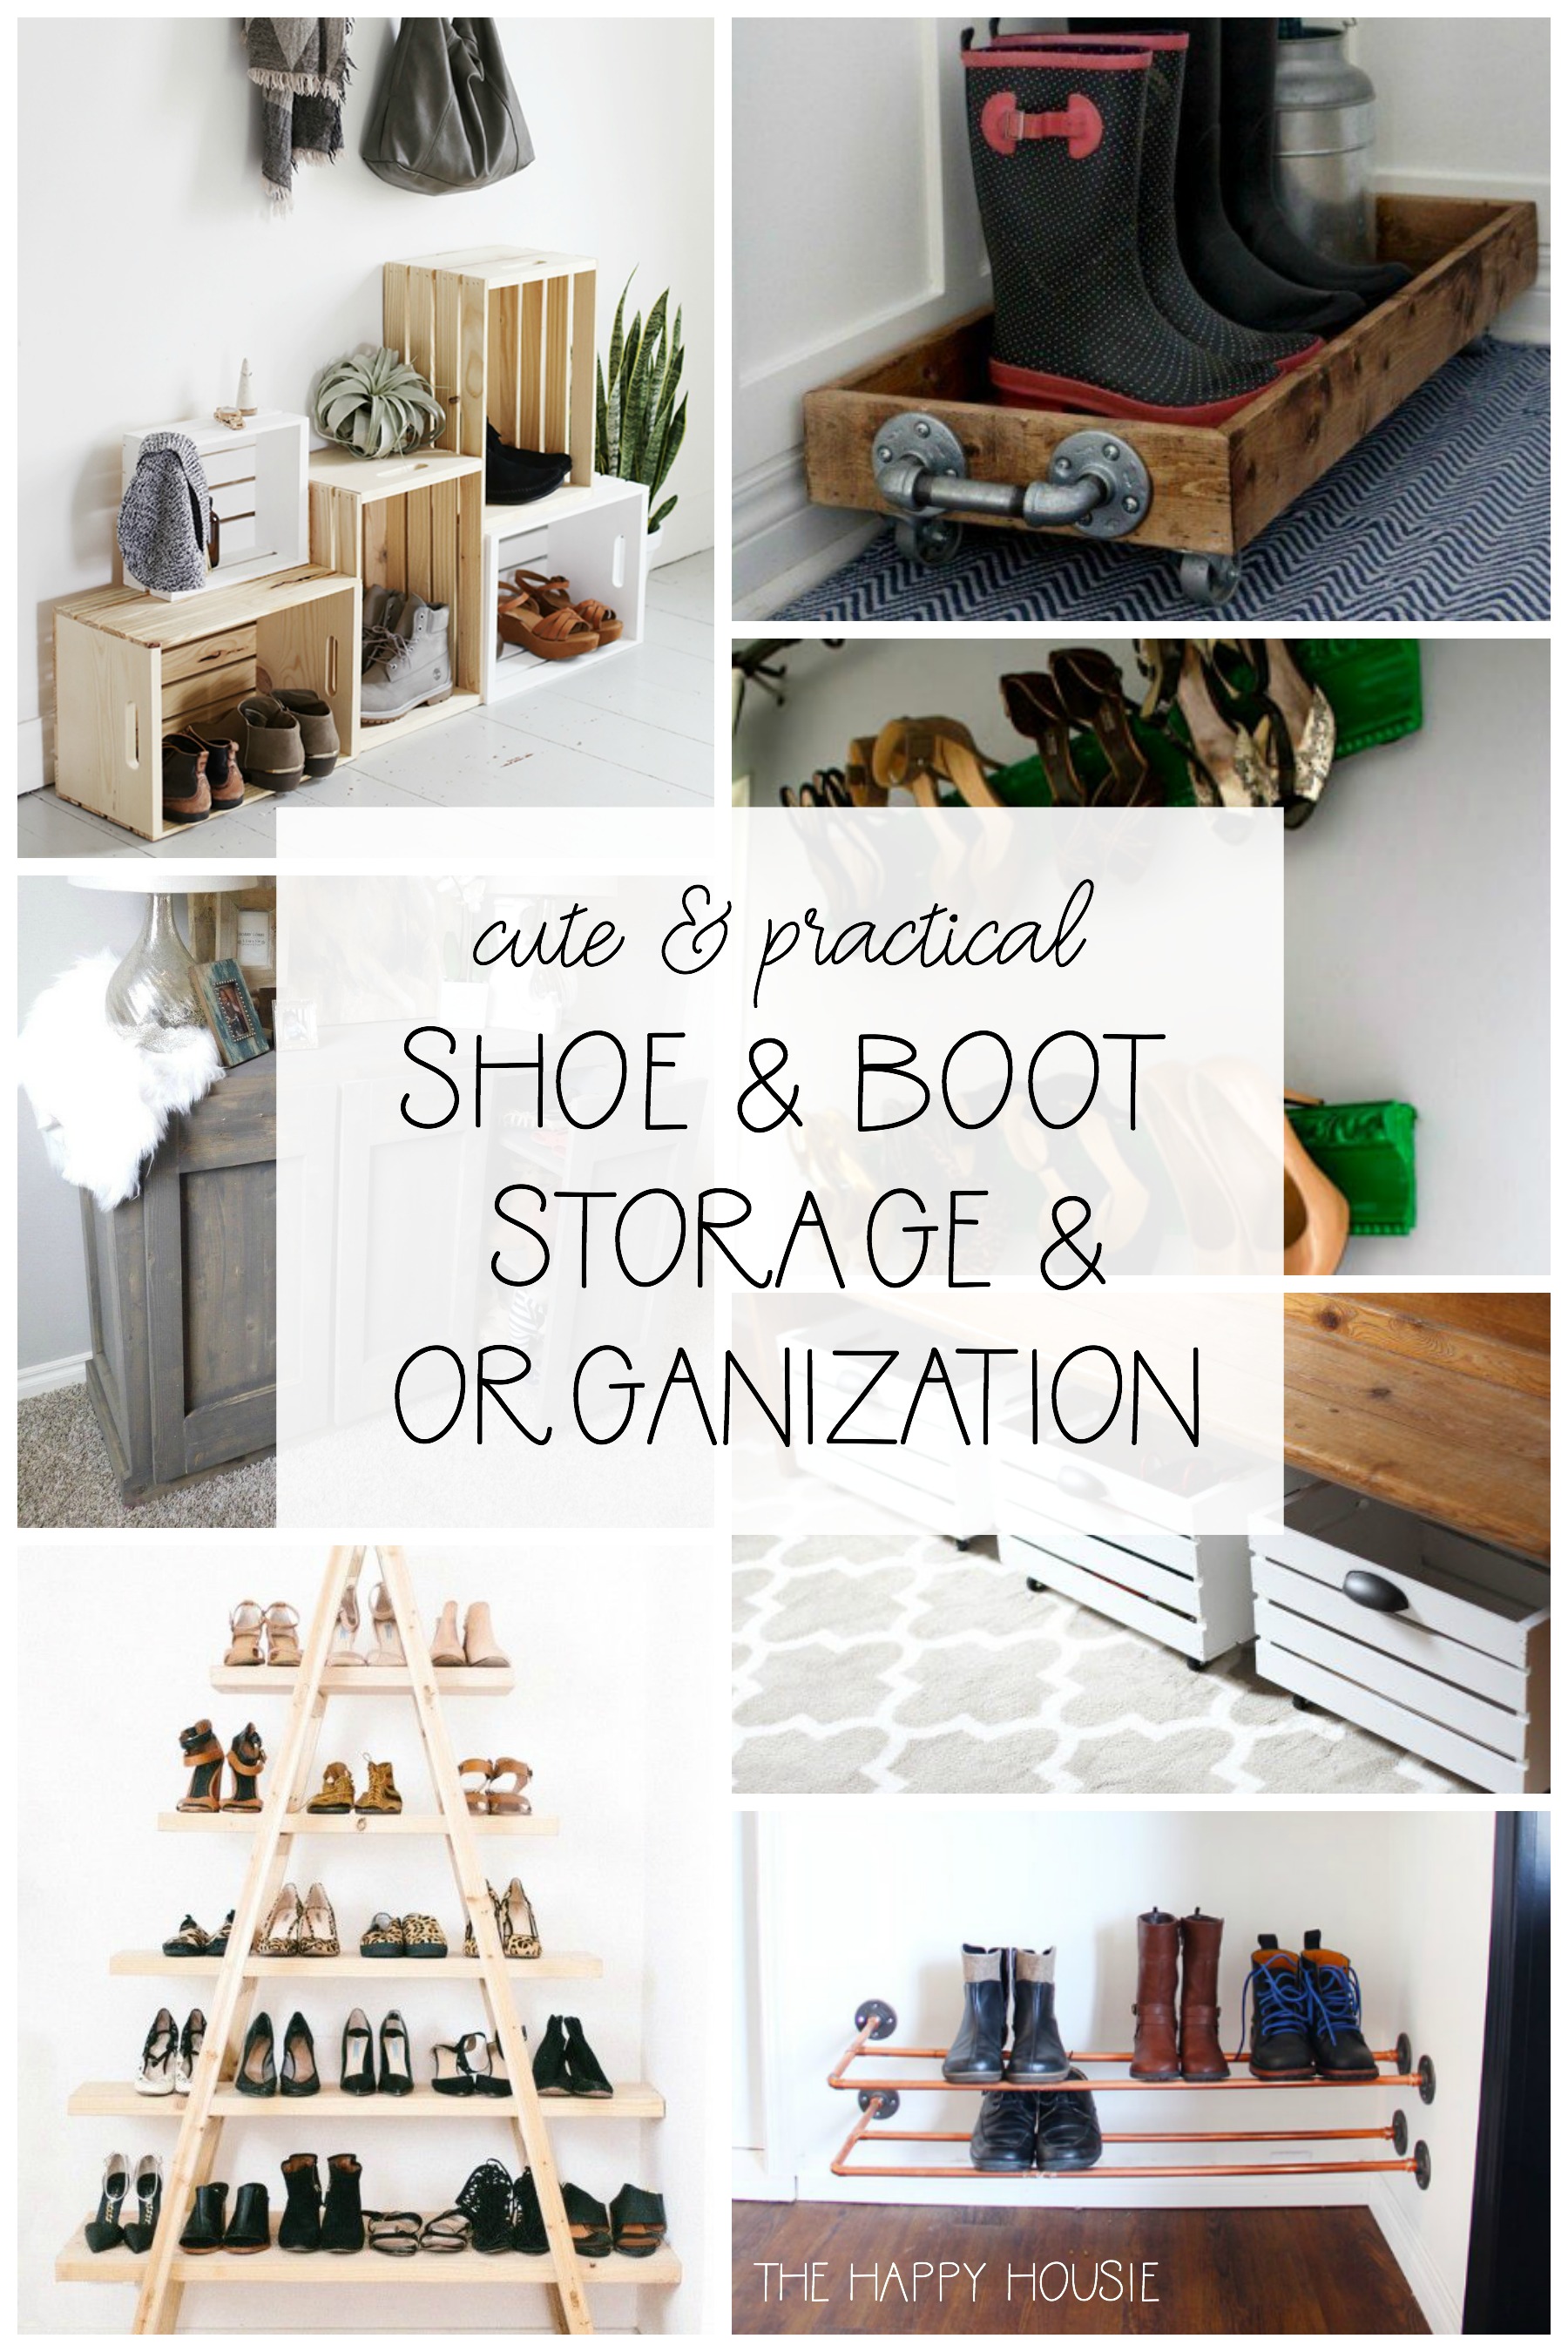 Store Shoes the Smart Way - Smart Storage